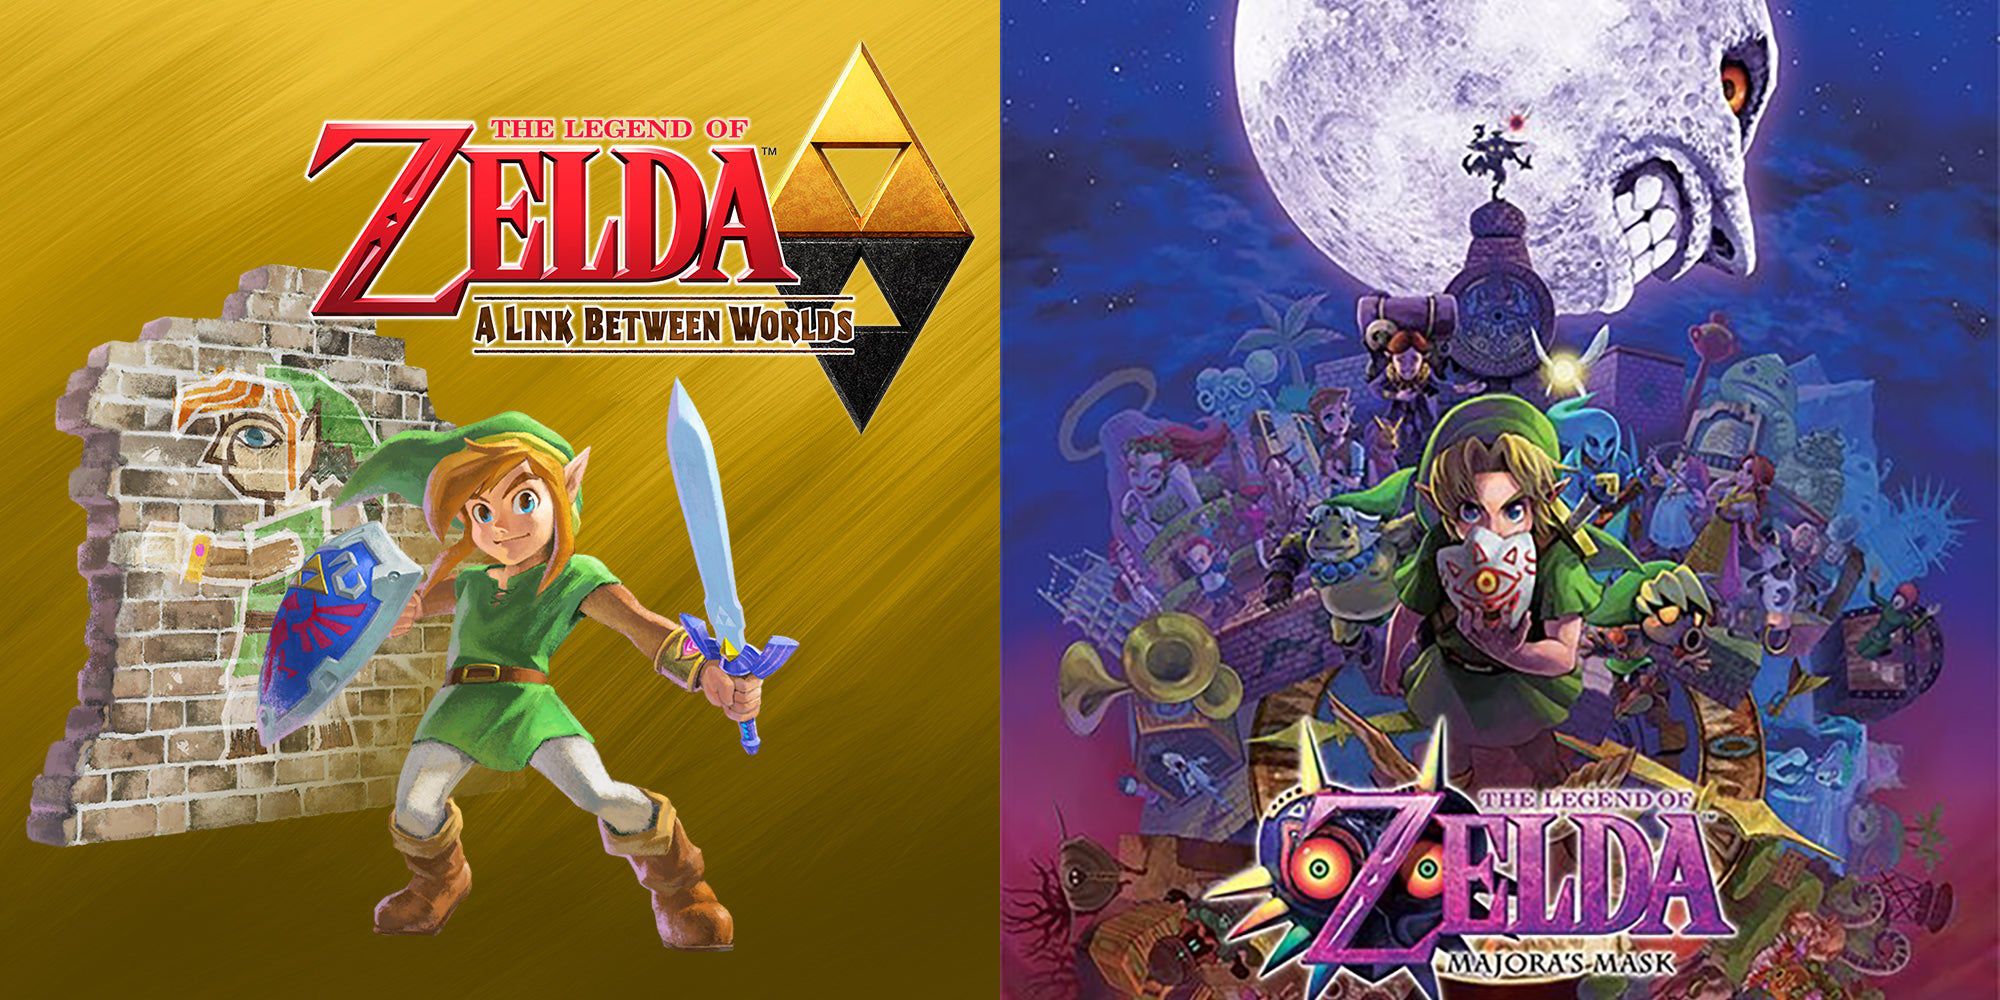 the legend of zelda a link between worlds and majora's mask game covers